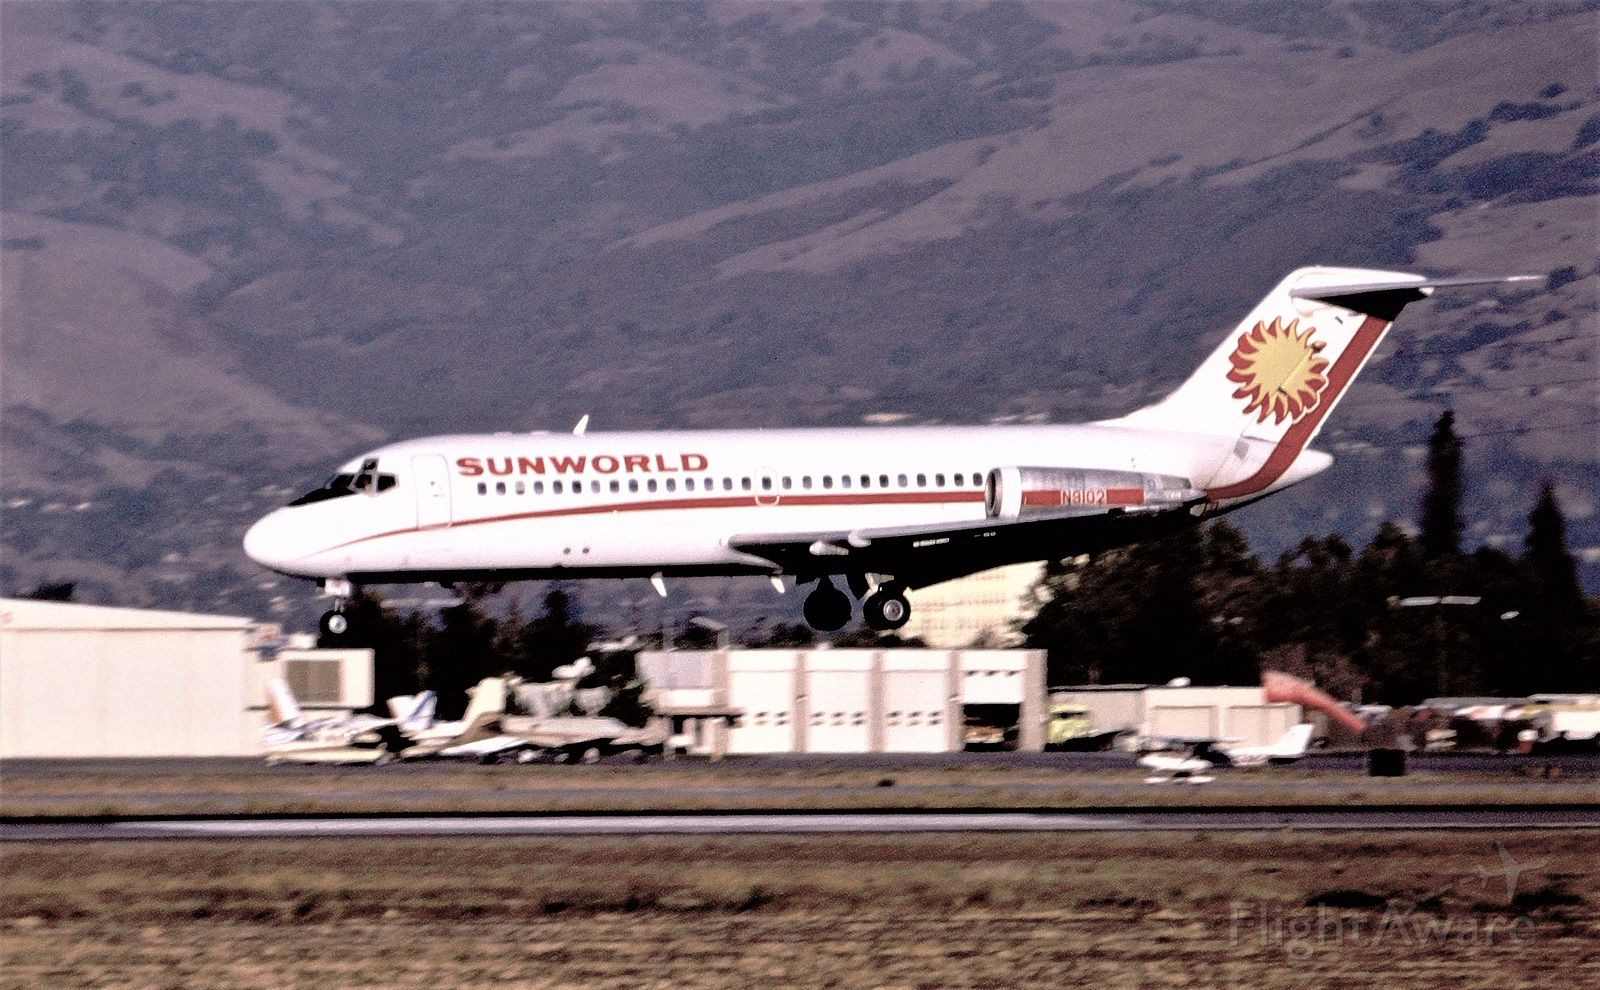 Douglas DC-9-10 (N9102) - KSJC - Im unsure on the date on this but has to be around 1980 early 80s at San Jose. This was rare at San Jose as this would have been a Charter and most likely gambliers Special. I rarely saw Sunworld at San Jose let alone a DC-9-10. Back in those days I rarely went into the terminal to ask or check the backboards for flights etc.This was taken on the west side of 30L right when they started building the San Jose Jet Center - as the fences were down and one could park and watch the Cops rarely bothered us.Later it was blocked off then they really started working on the SJJC.